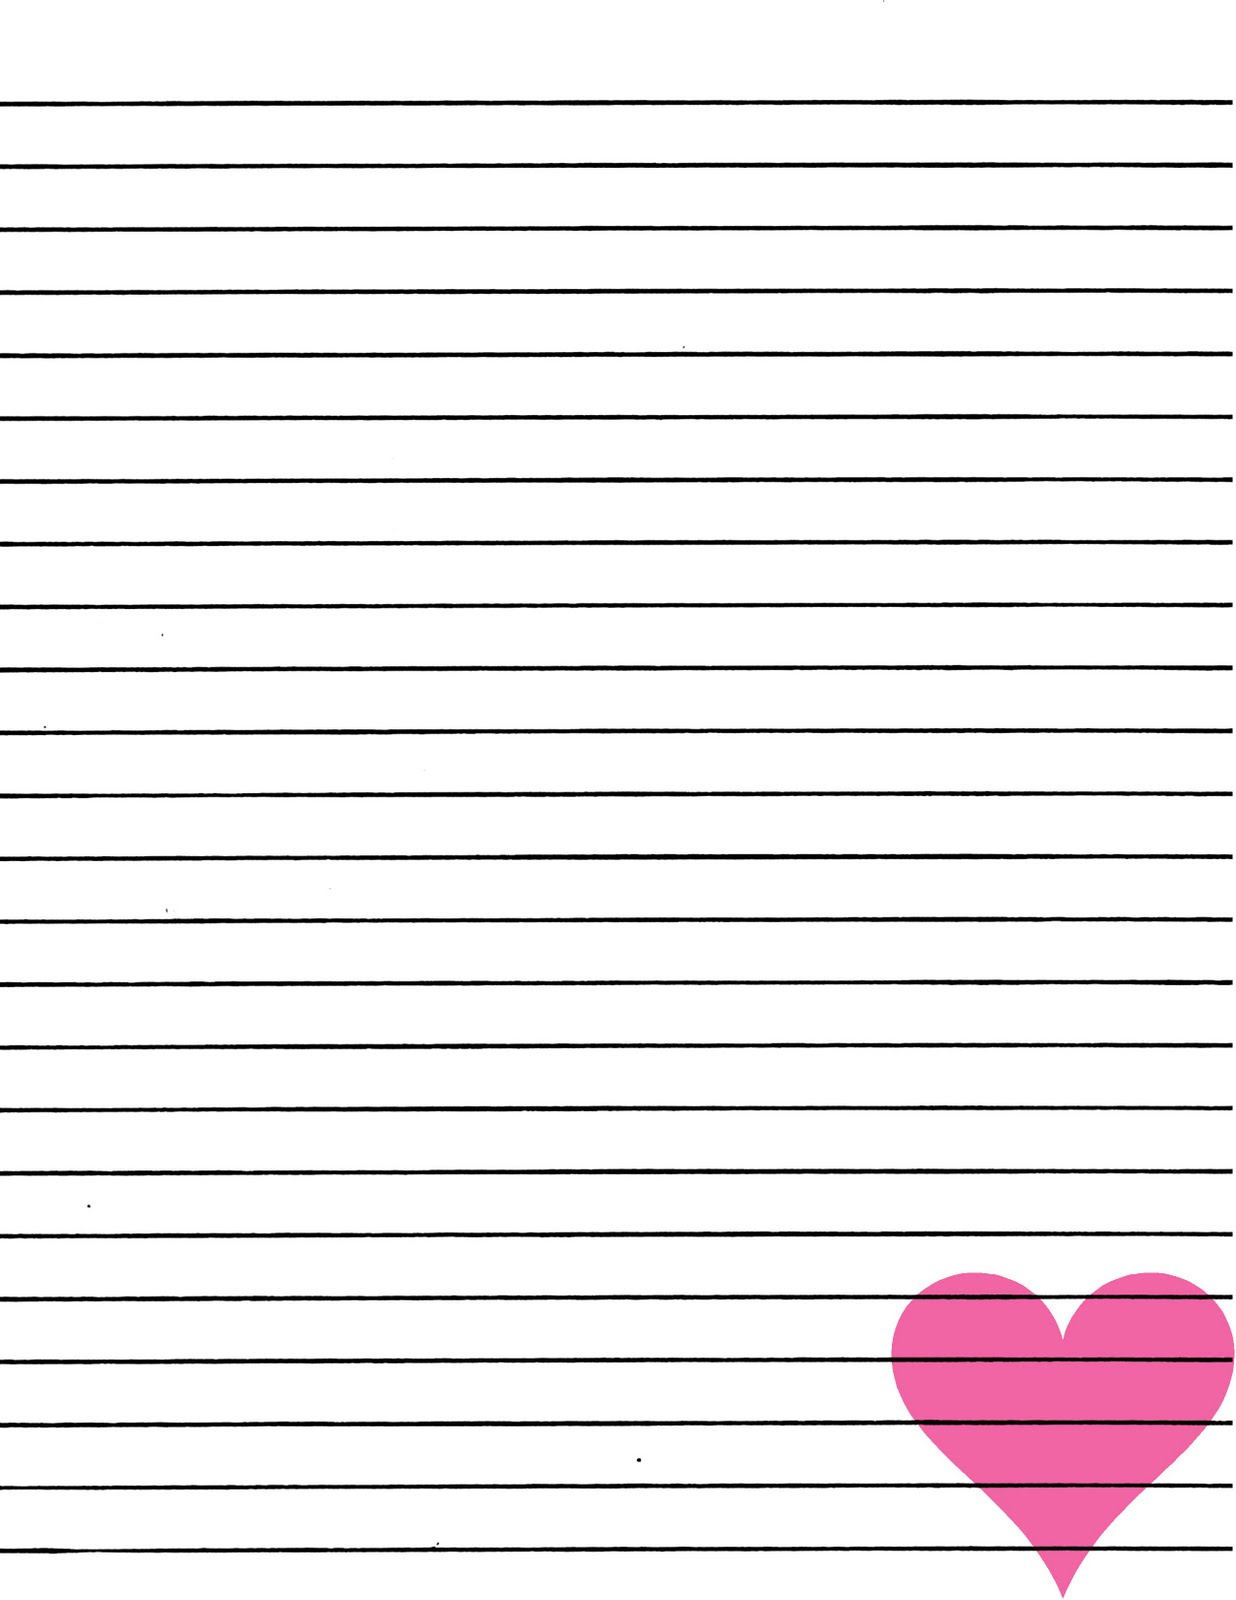 Just Smashing Paper FREEBIE Pink Heart Lined Paper Printable 